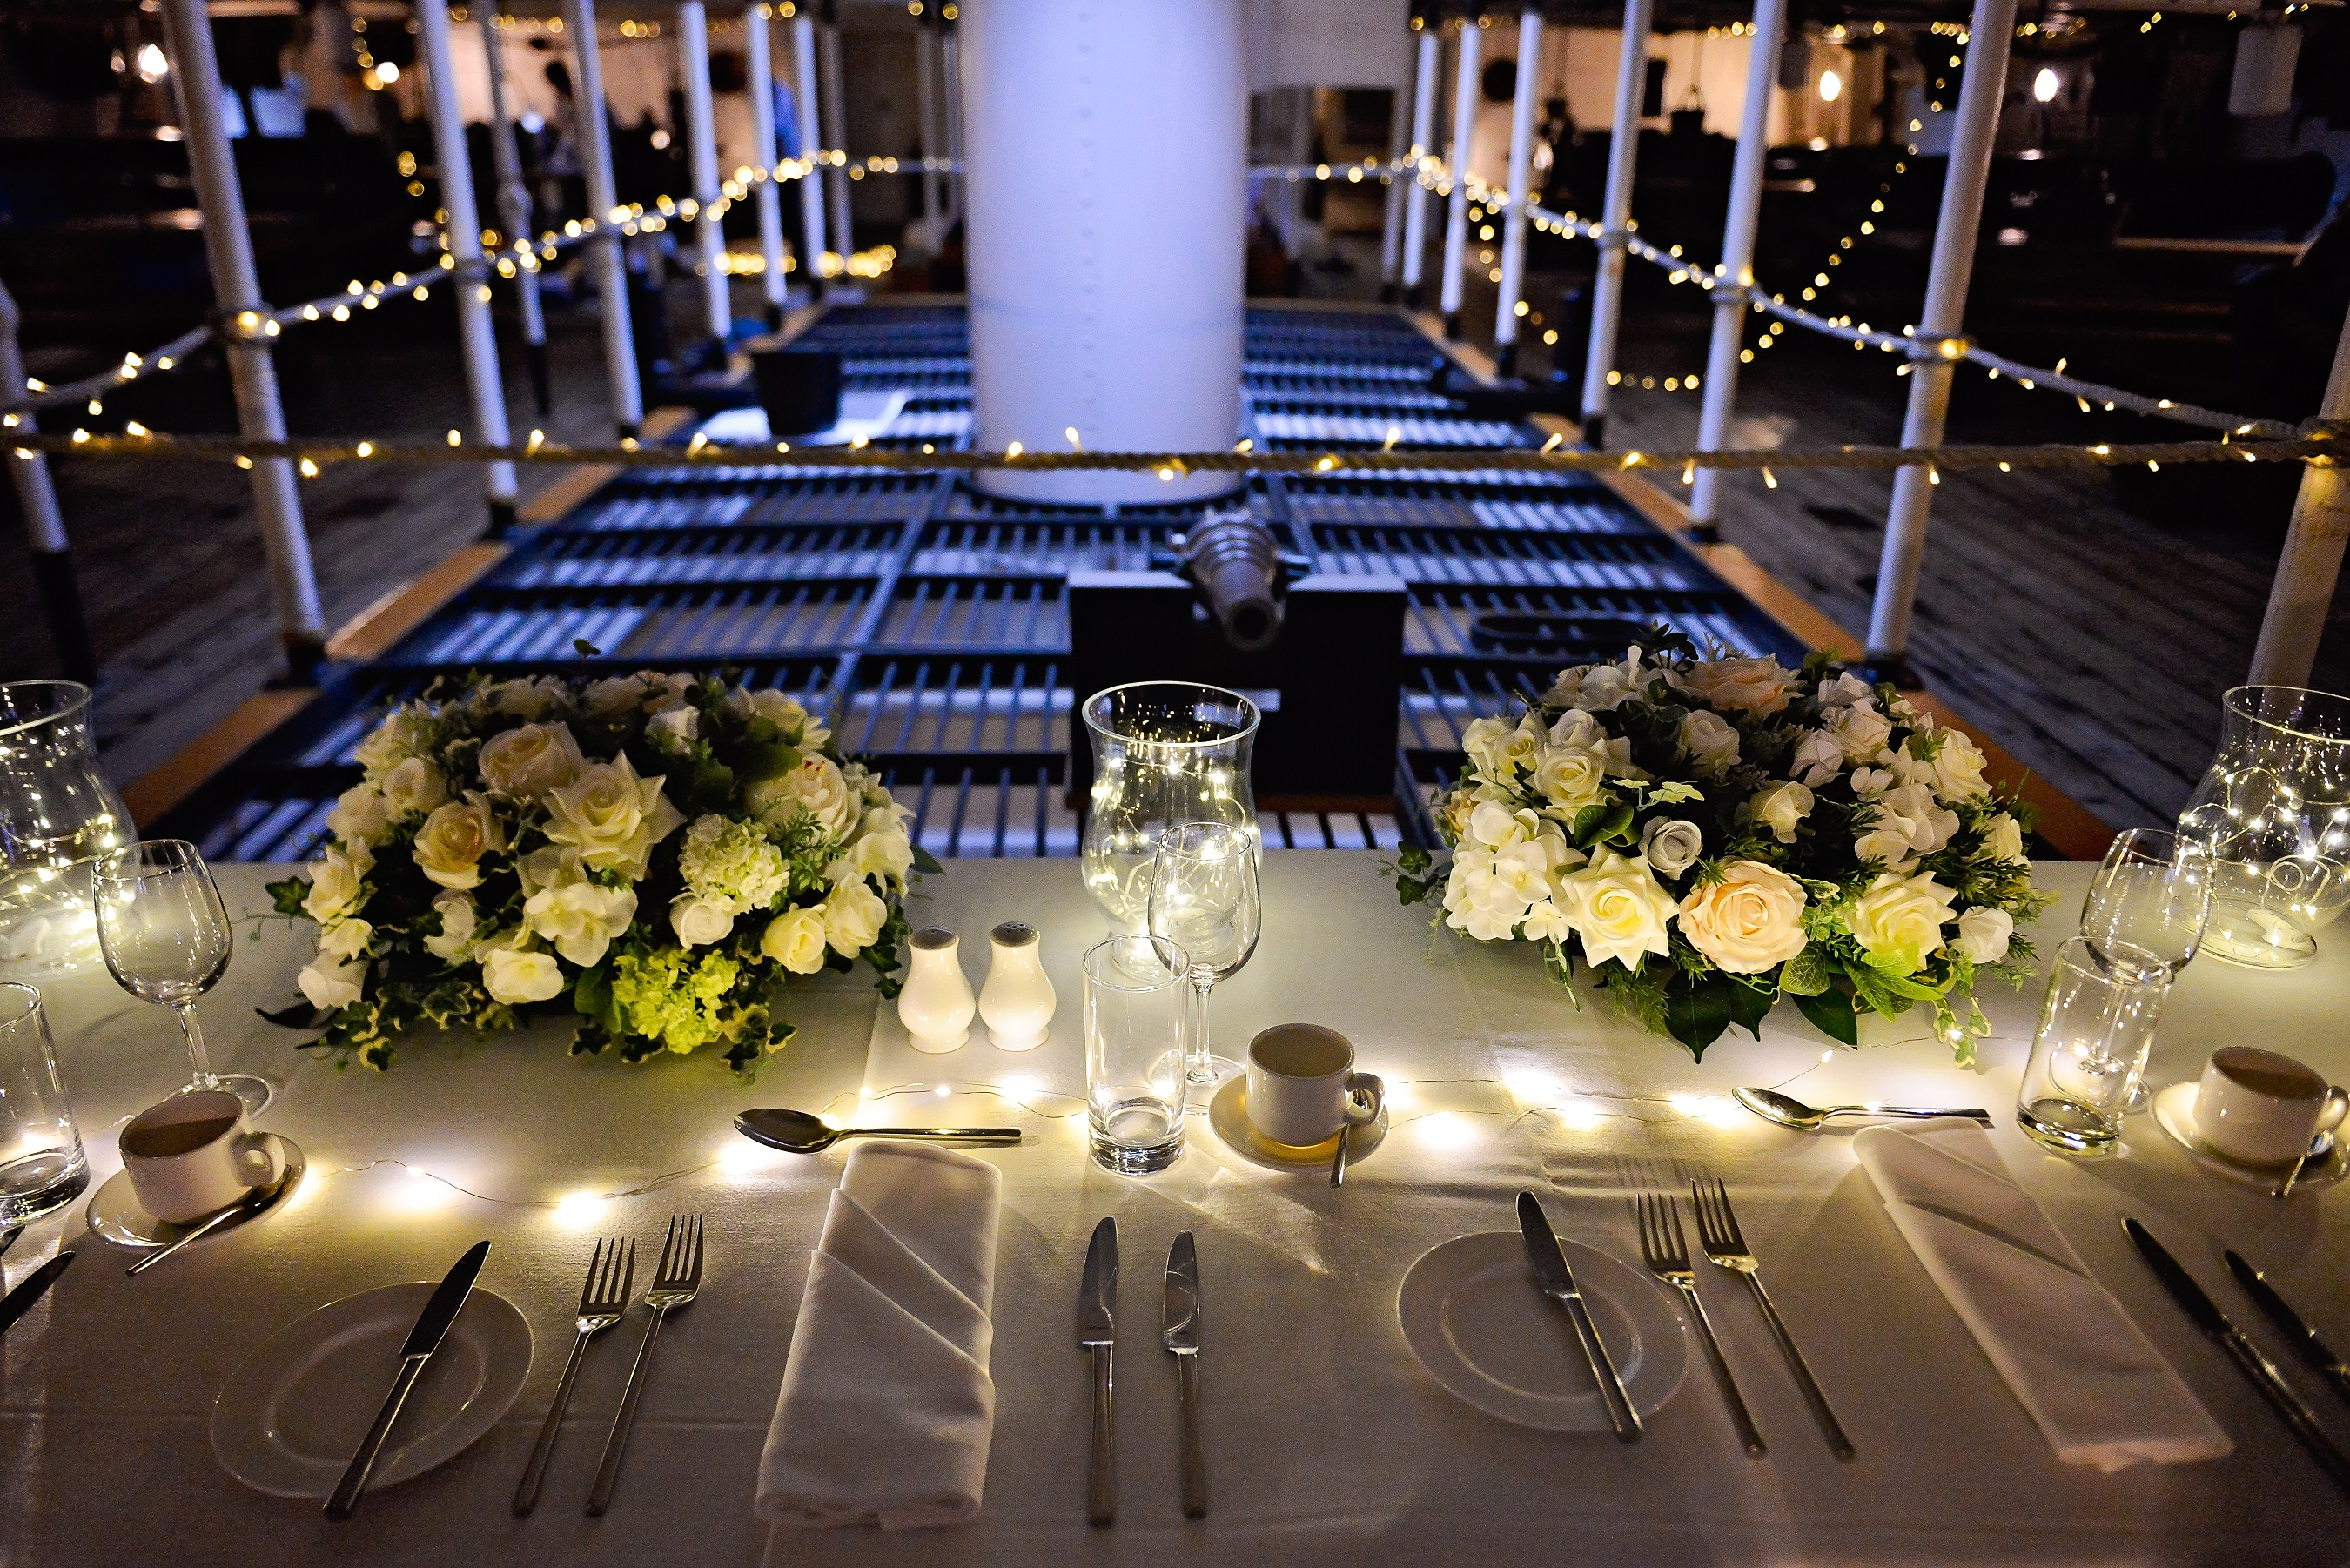 The wedding top table onboard a ceremony at HMS Warrior. The table is made up with white linen and cream flowers, and illuminated with white fairy lights. 